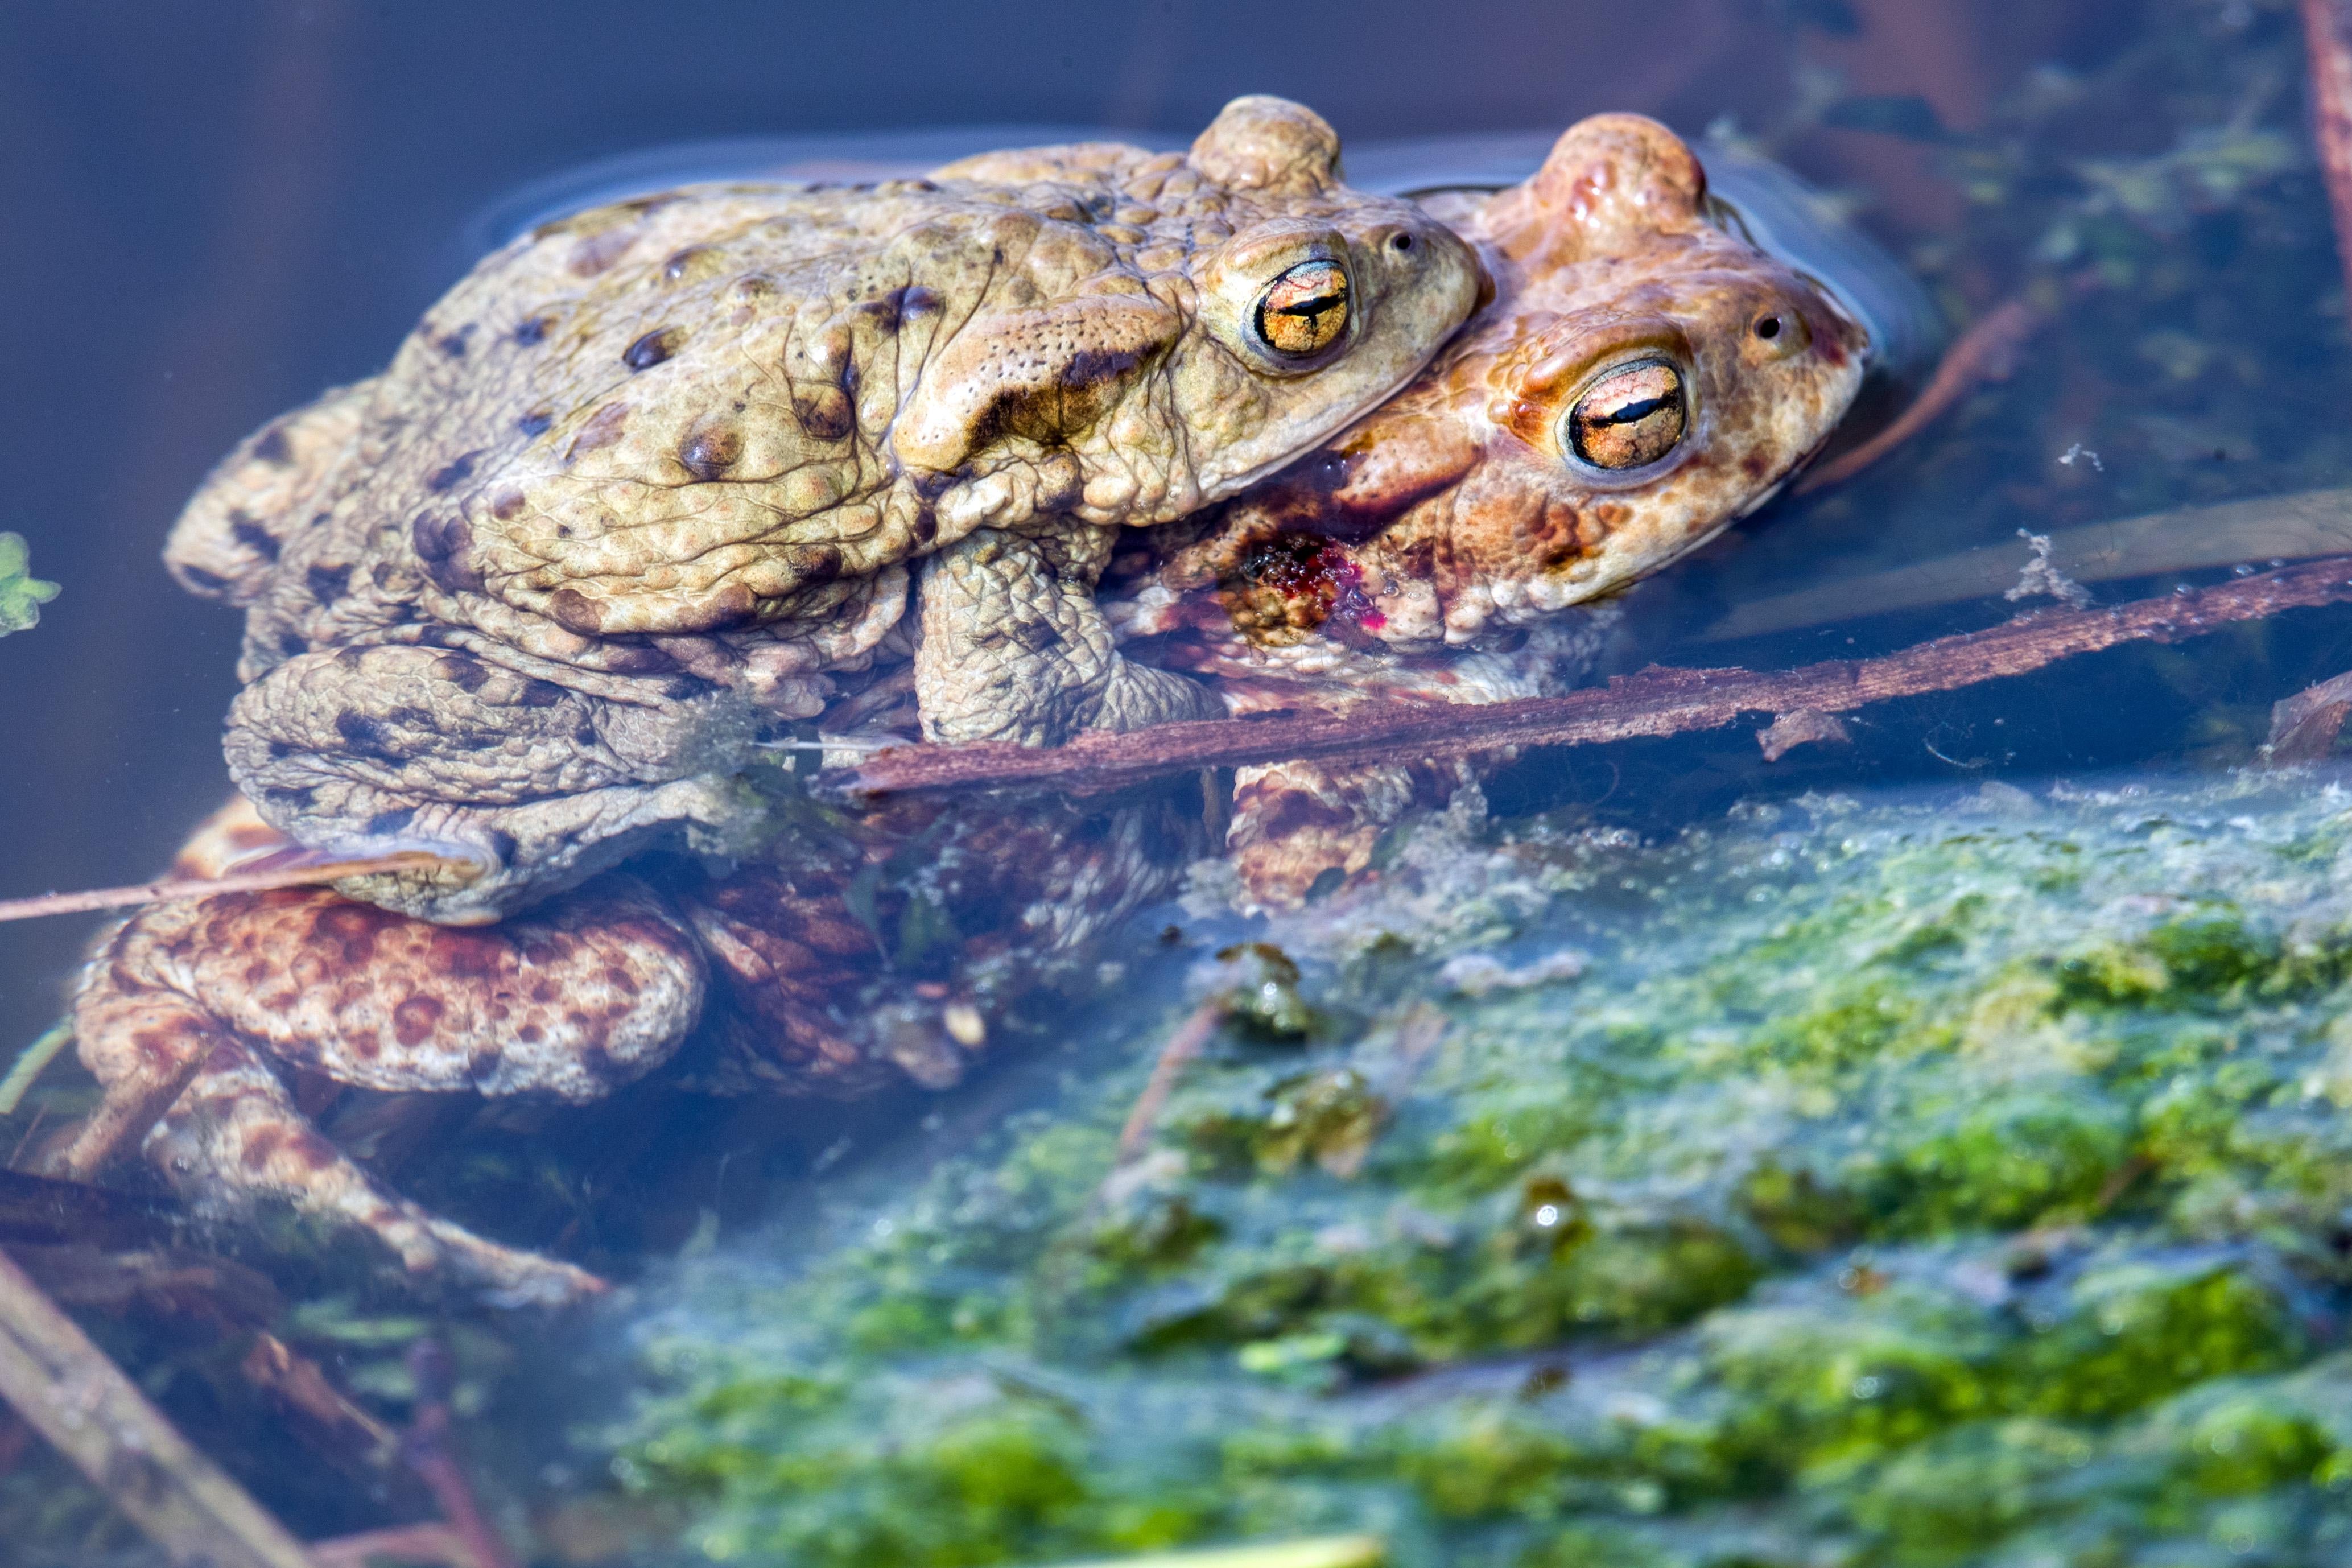 Common toads mate in a pond.